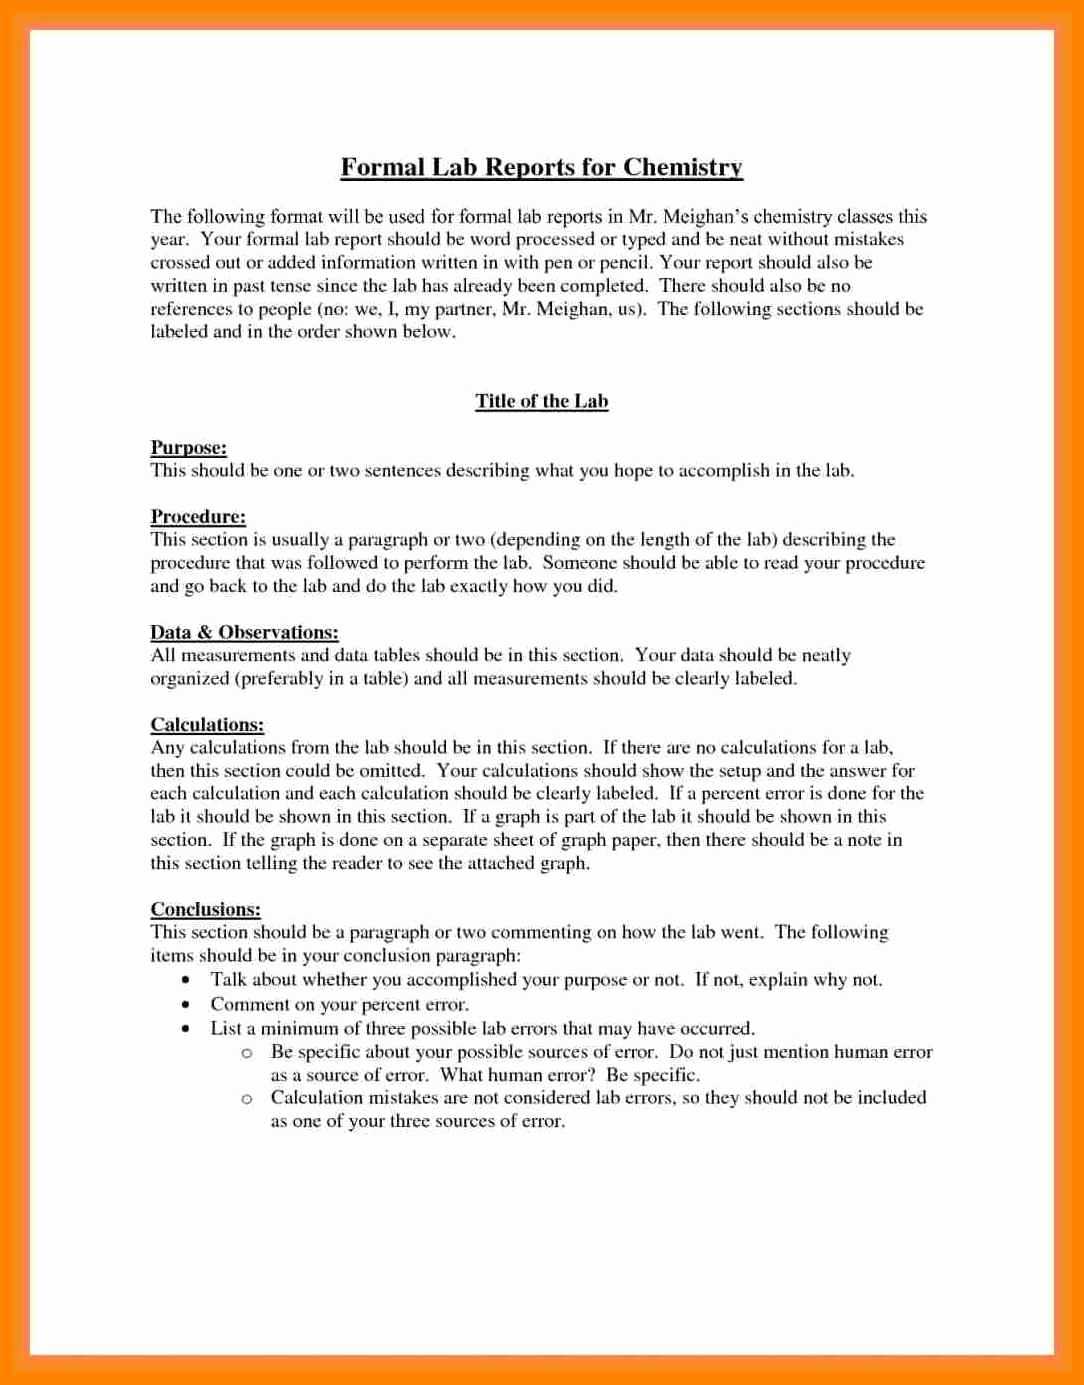 003 Formal Lab Report Example Best Write Up Template Of With Lab Report Template Chemistry